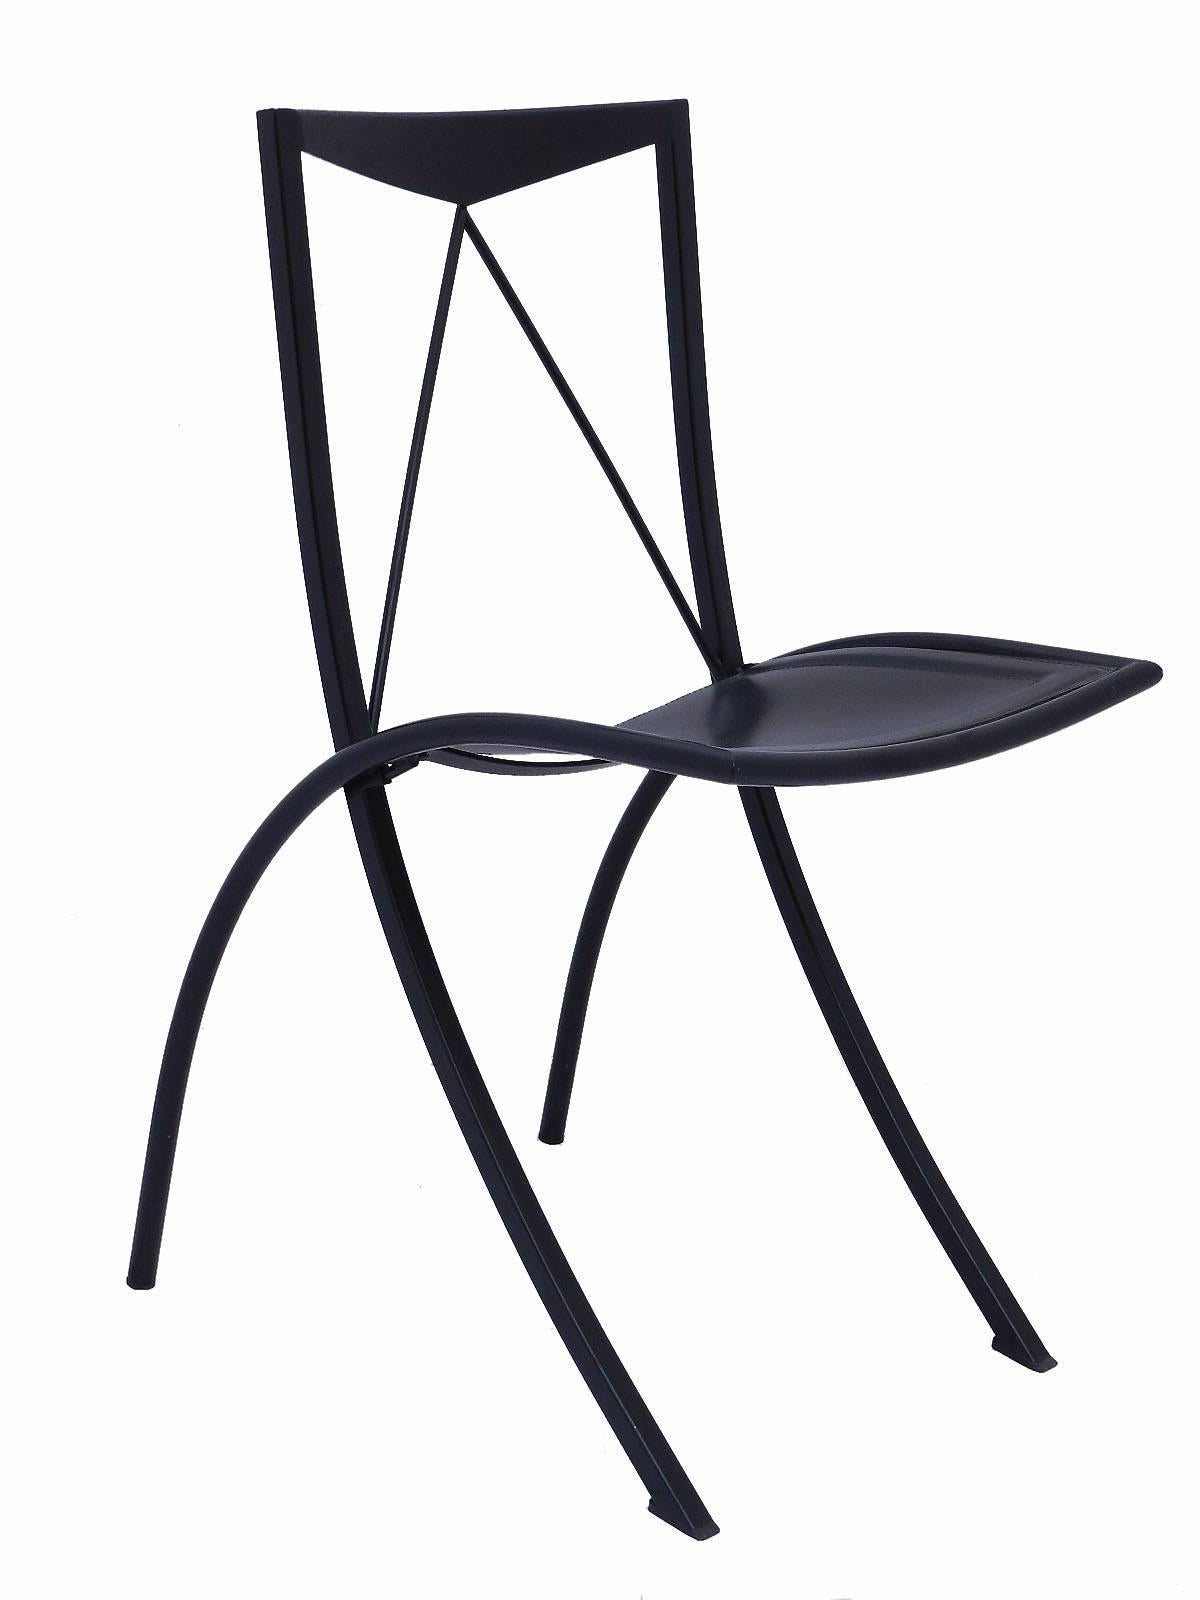 Eight Folding Dining Chairs Cattelan Italia Black Leather Vintage, 20th Century For Sale 2